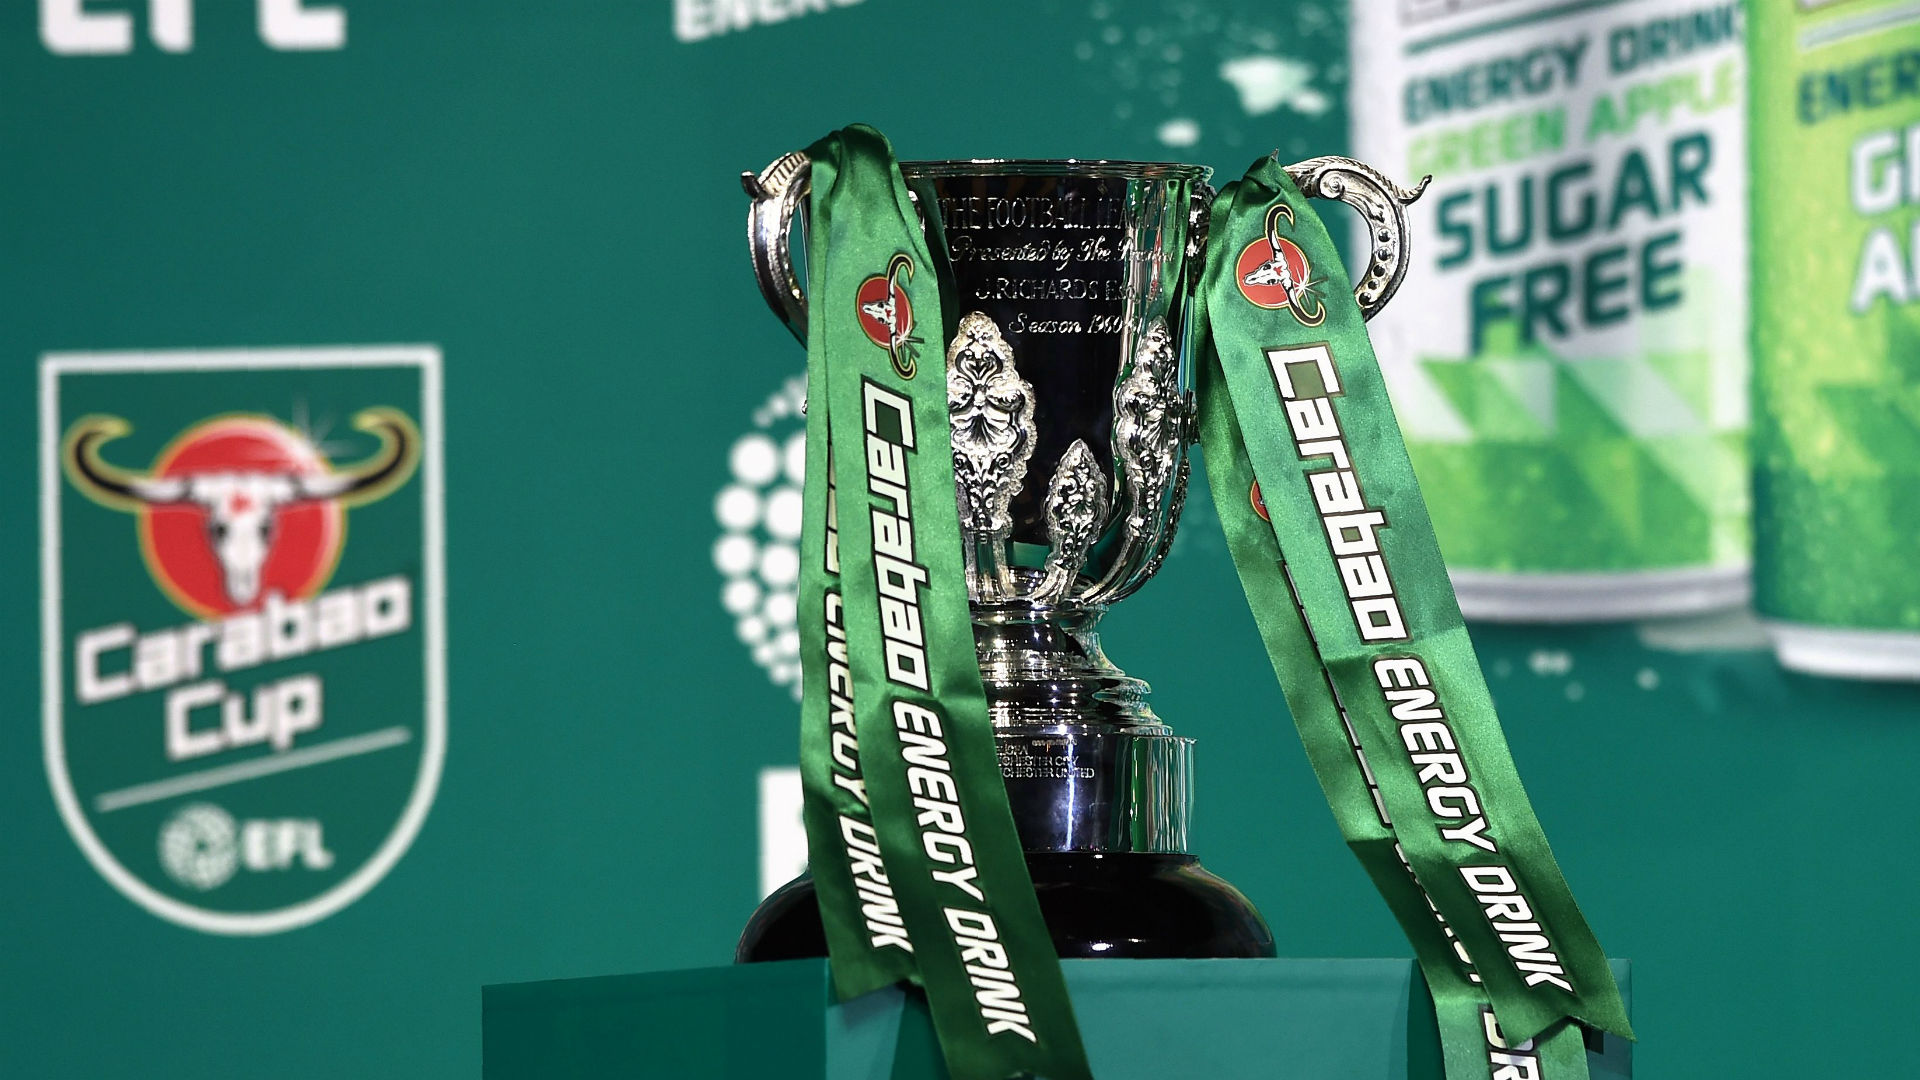 Carabao Cup 2019 final: How to watch, tickets, teams, time & date